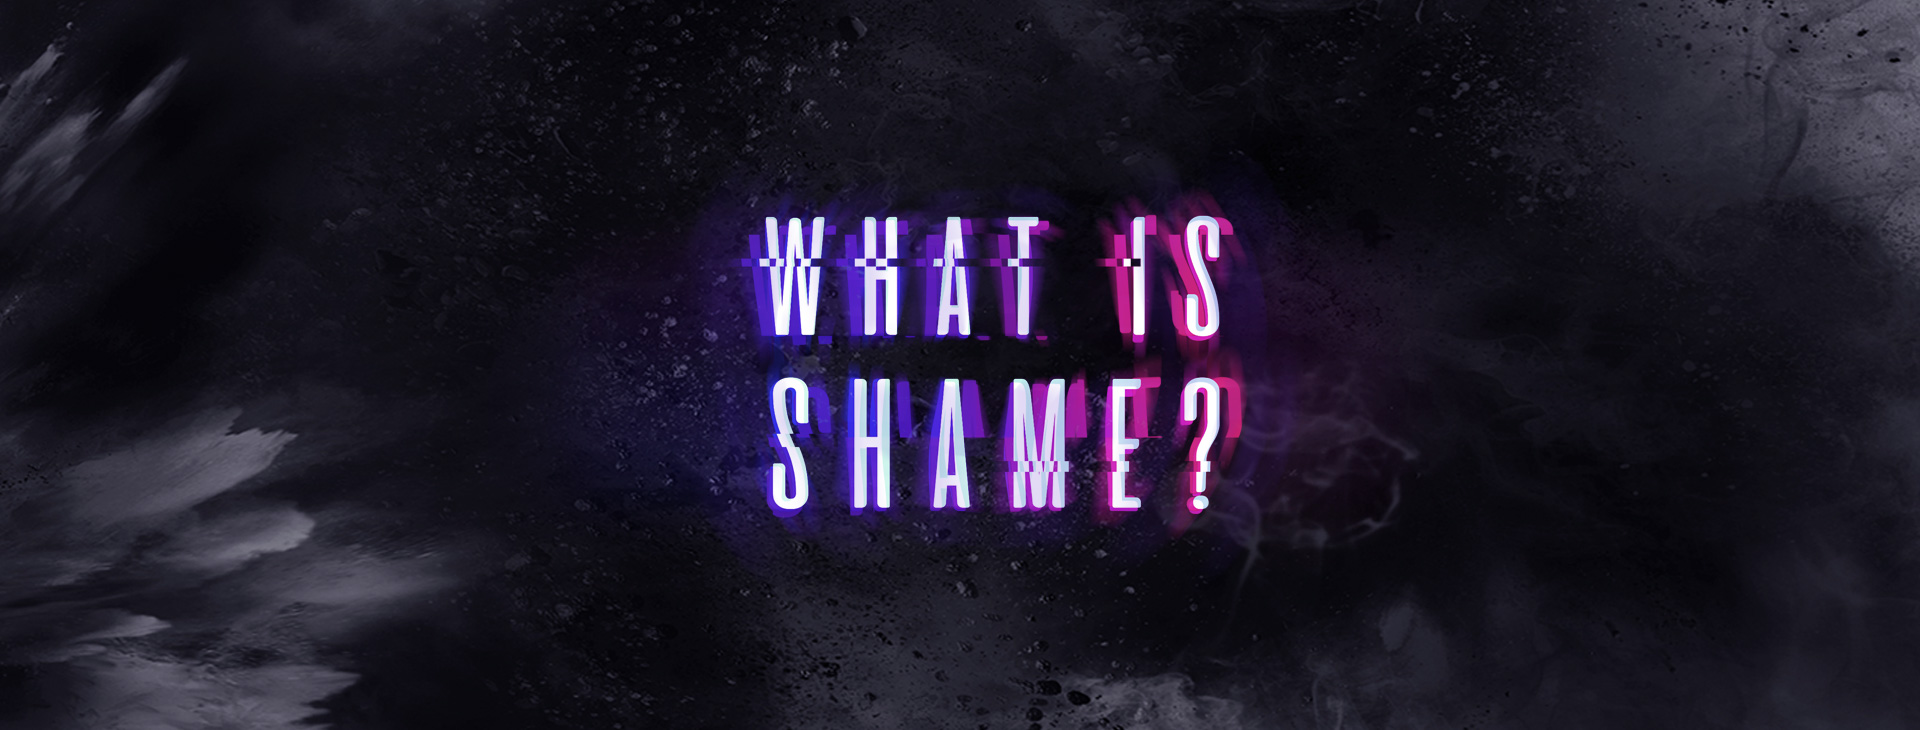 Banner featuring the slogan of 2019 Porn Film Festival Vienna "What is shame?"